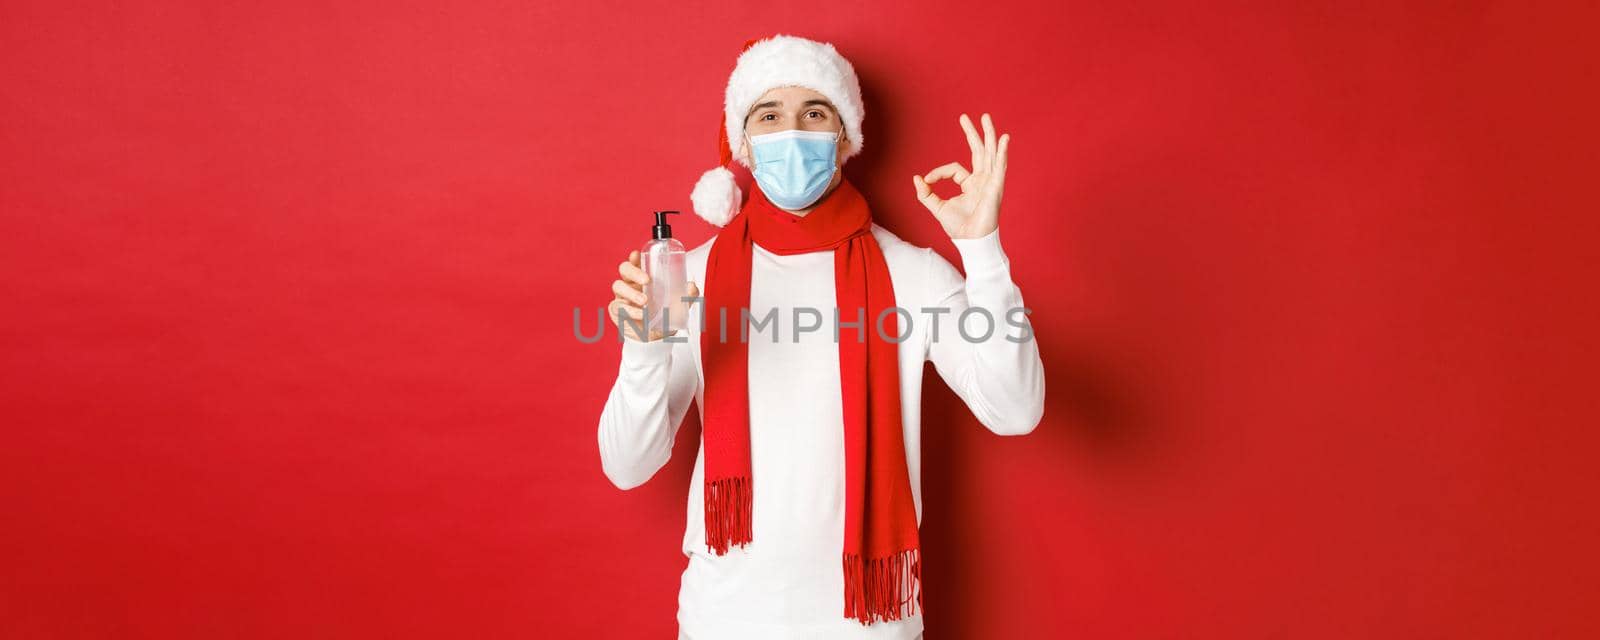 Concept of covid-19, christmas and holidays during pandemic. Attractive man in santa hat and medical mask, showing okay sign while recommending hand sanitizer, standing over red background.